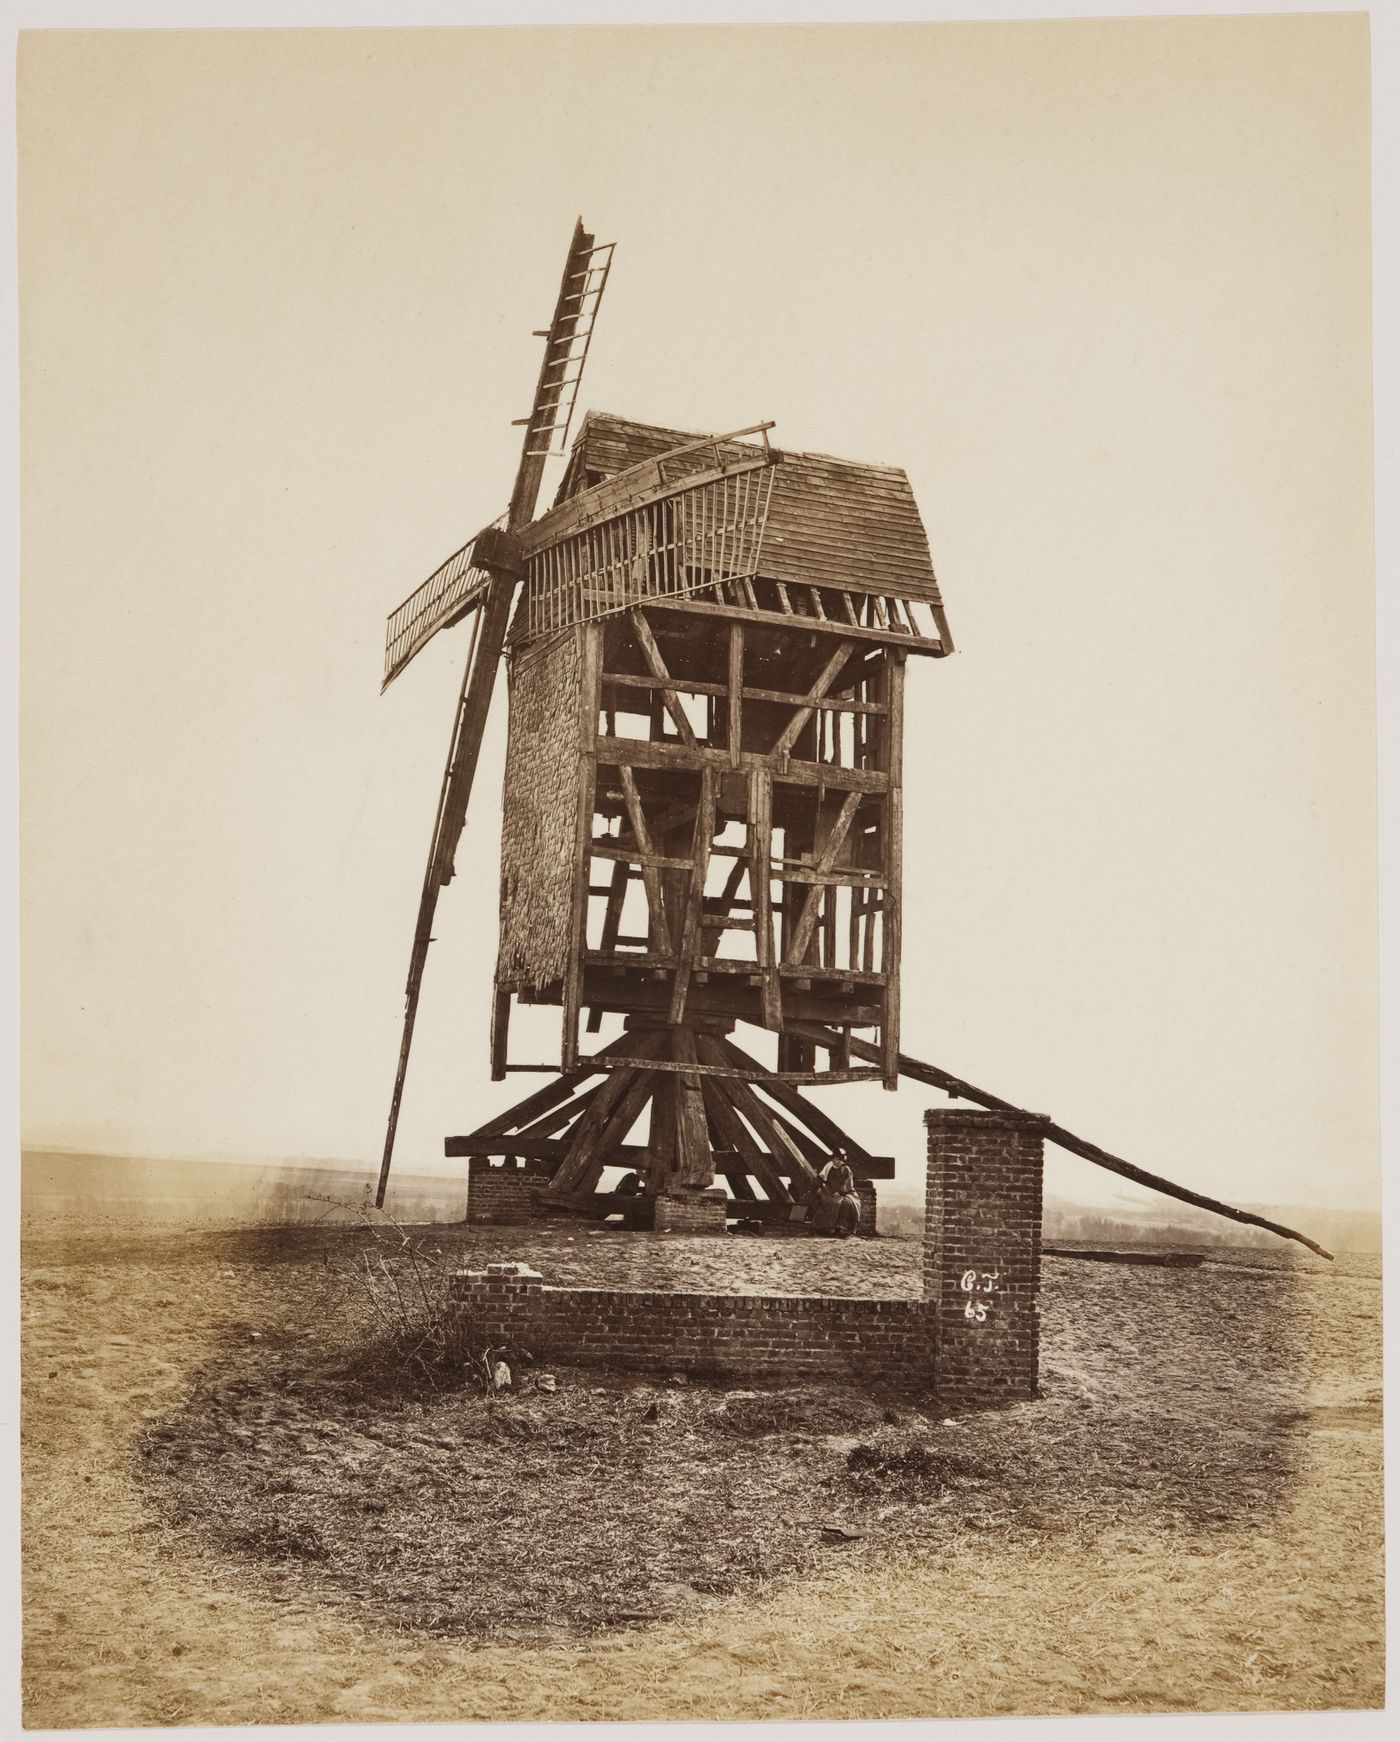 View of a windmill and a soldier after the Paris Commune uprising of 1871, St. Quentin [?], France